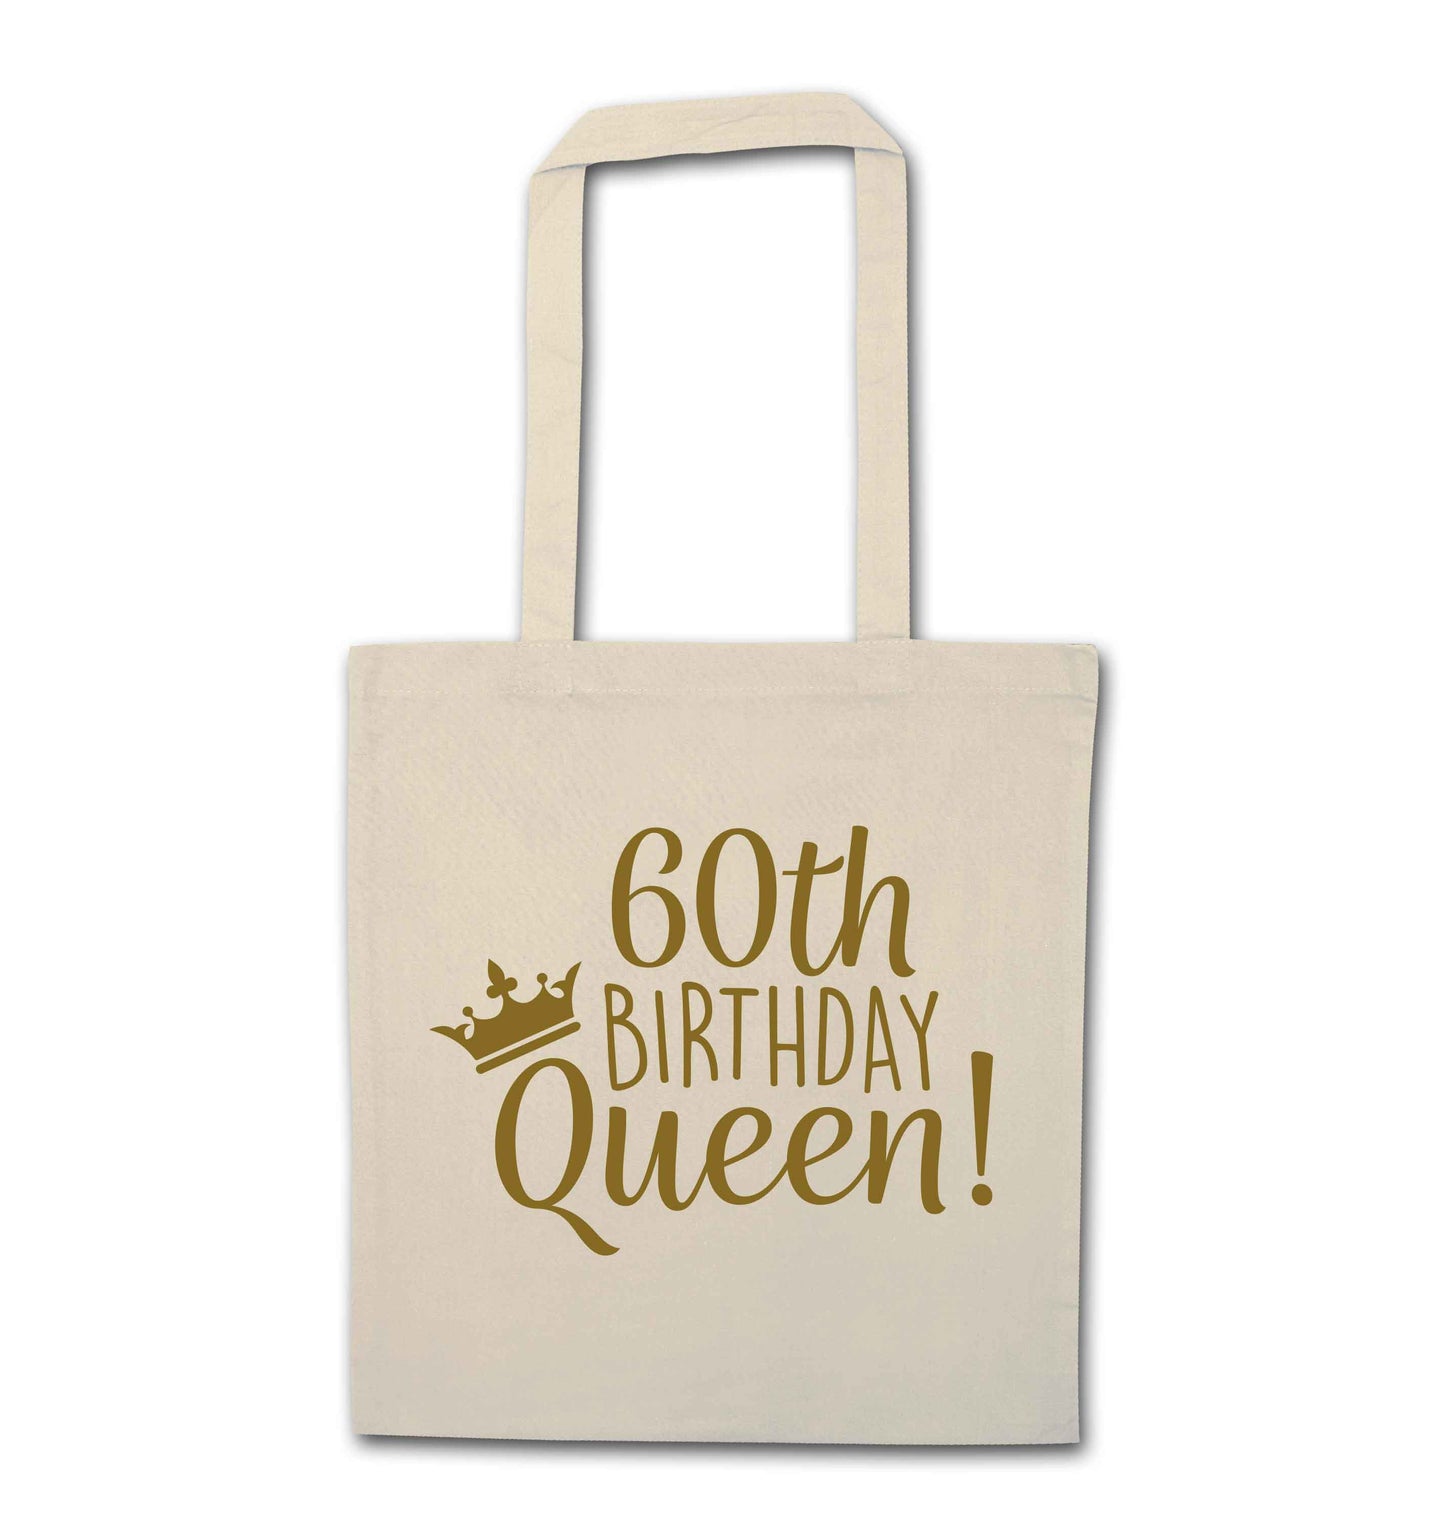 60th birthday Queen natural tote bag